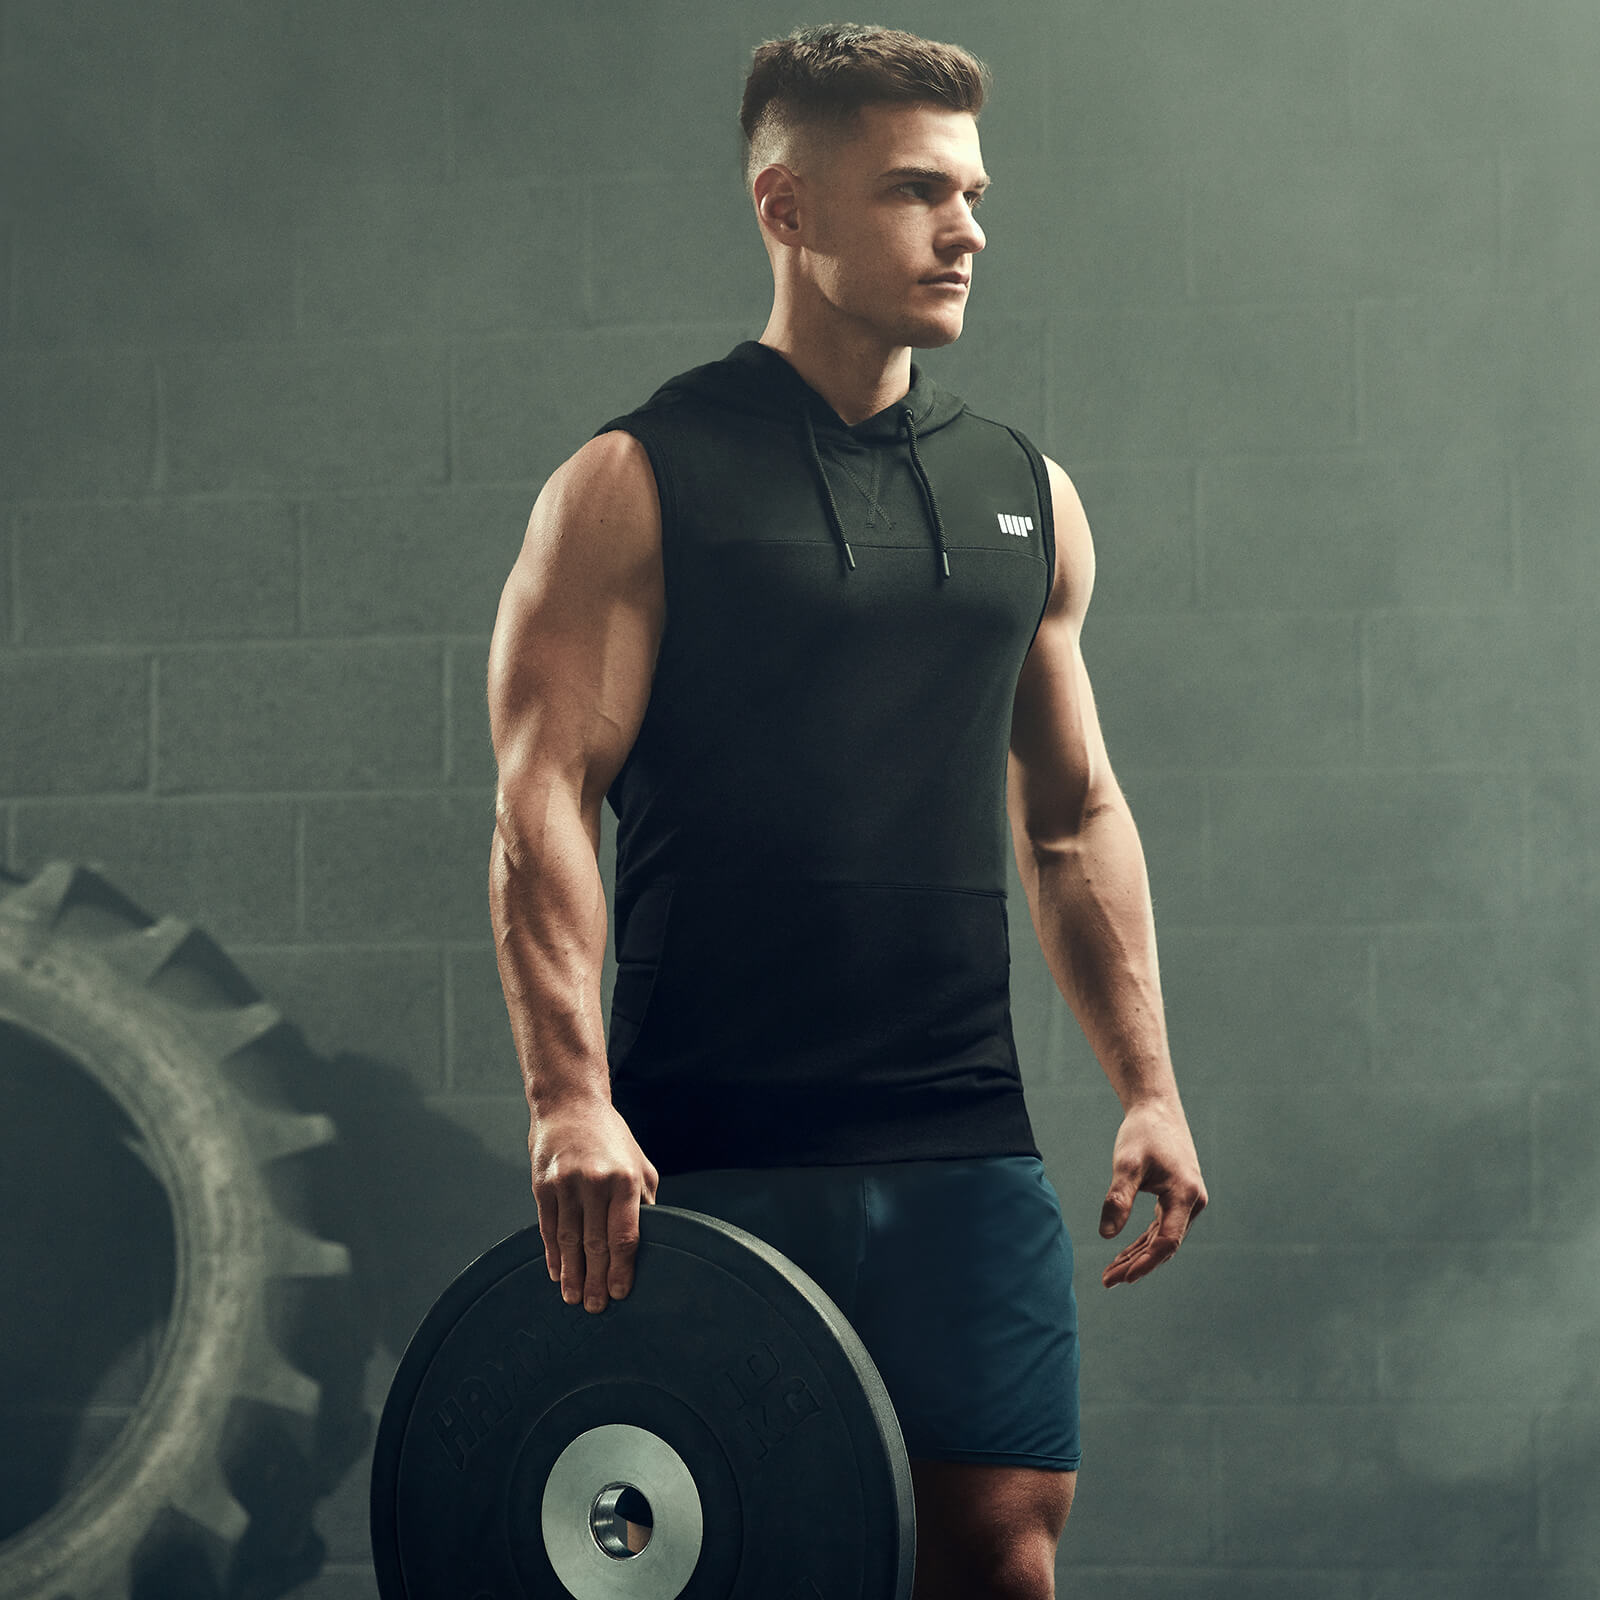 Myprotein Men's Training Outfit